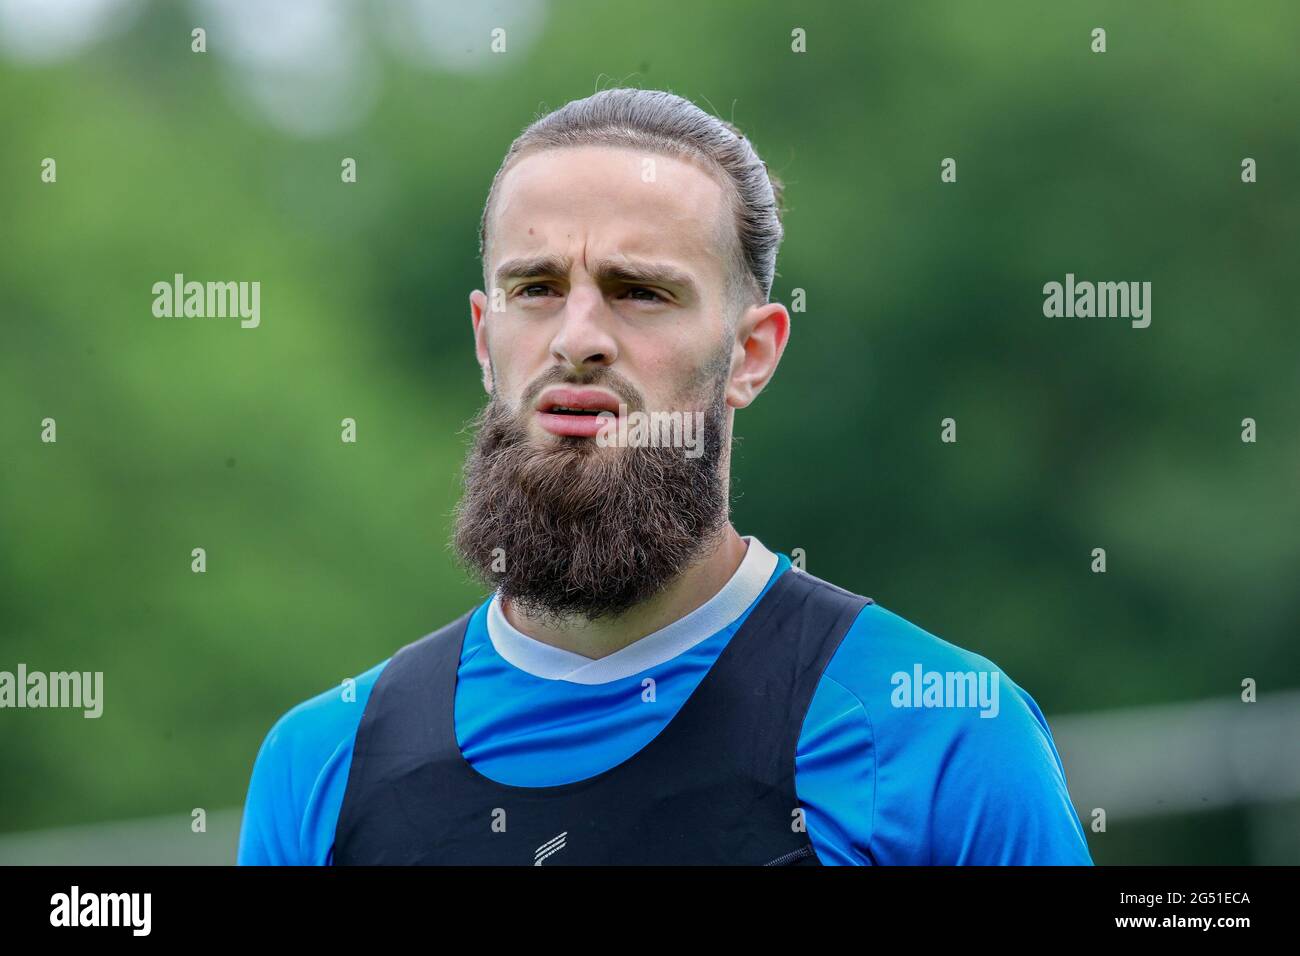 ZWOLLE, NETHERLANDS - JUNE 24: Destan Bajselmani of Pec Zwolle during the first First training of the season of PEC Zwolle of season 2021-2022 at Sportpark de Elshof on June 24, 2021 in Zwolle, Netherlands. (Photo by Ben Gal/Orange Pictures) Stock Photo